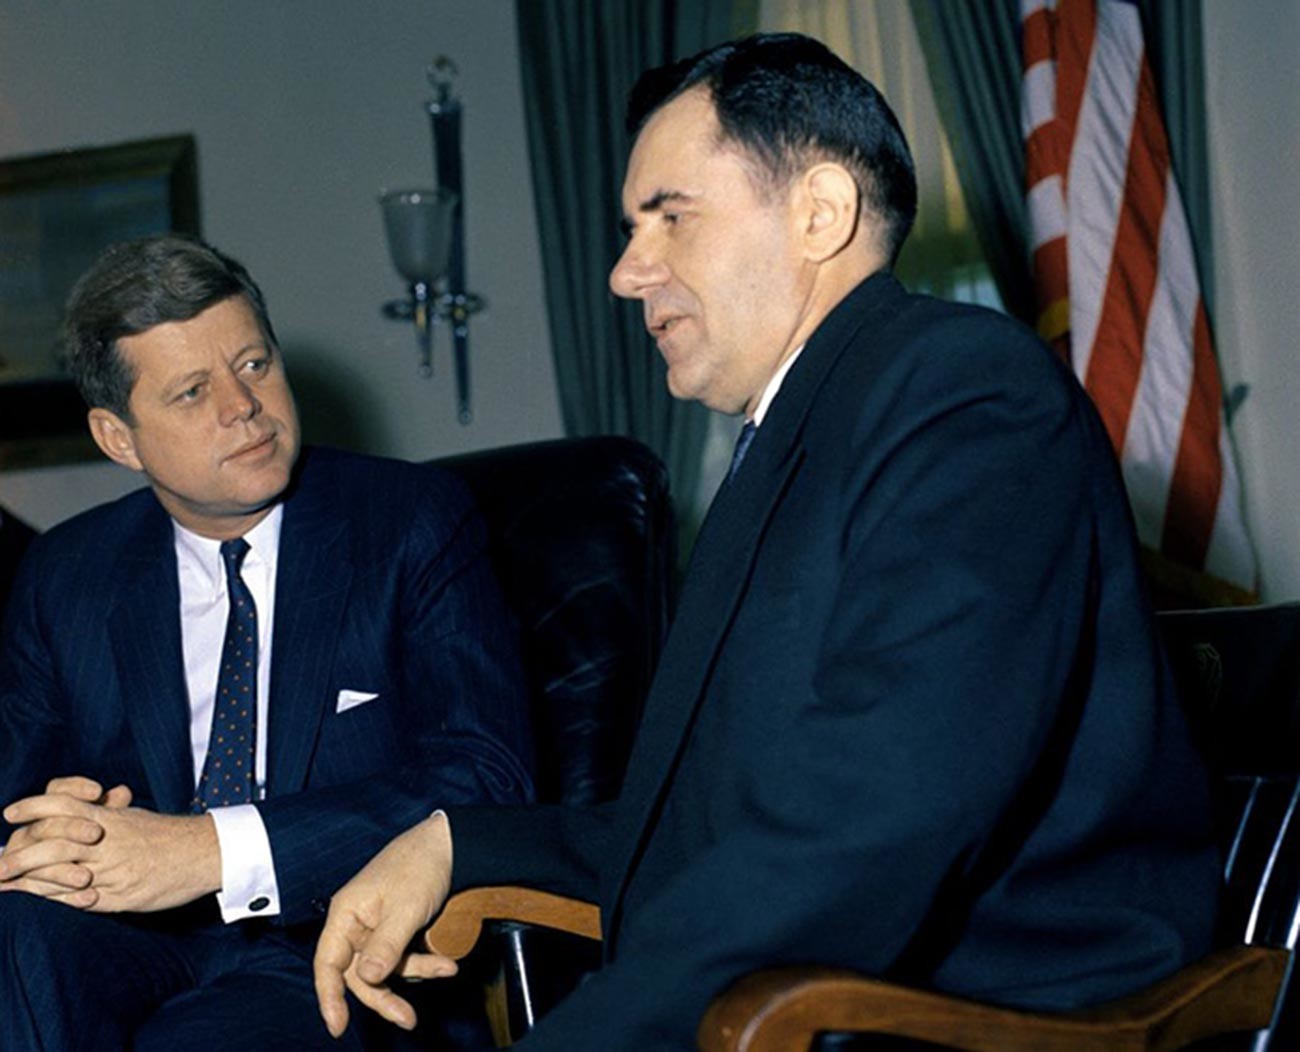 John Kennedy and Andrei Gromyko in the Oval Office at the White House in Washington D.C.